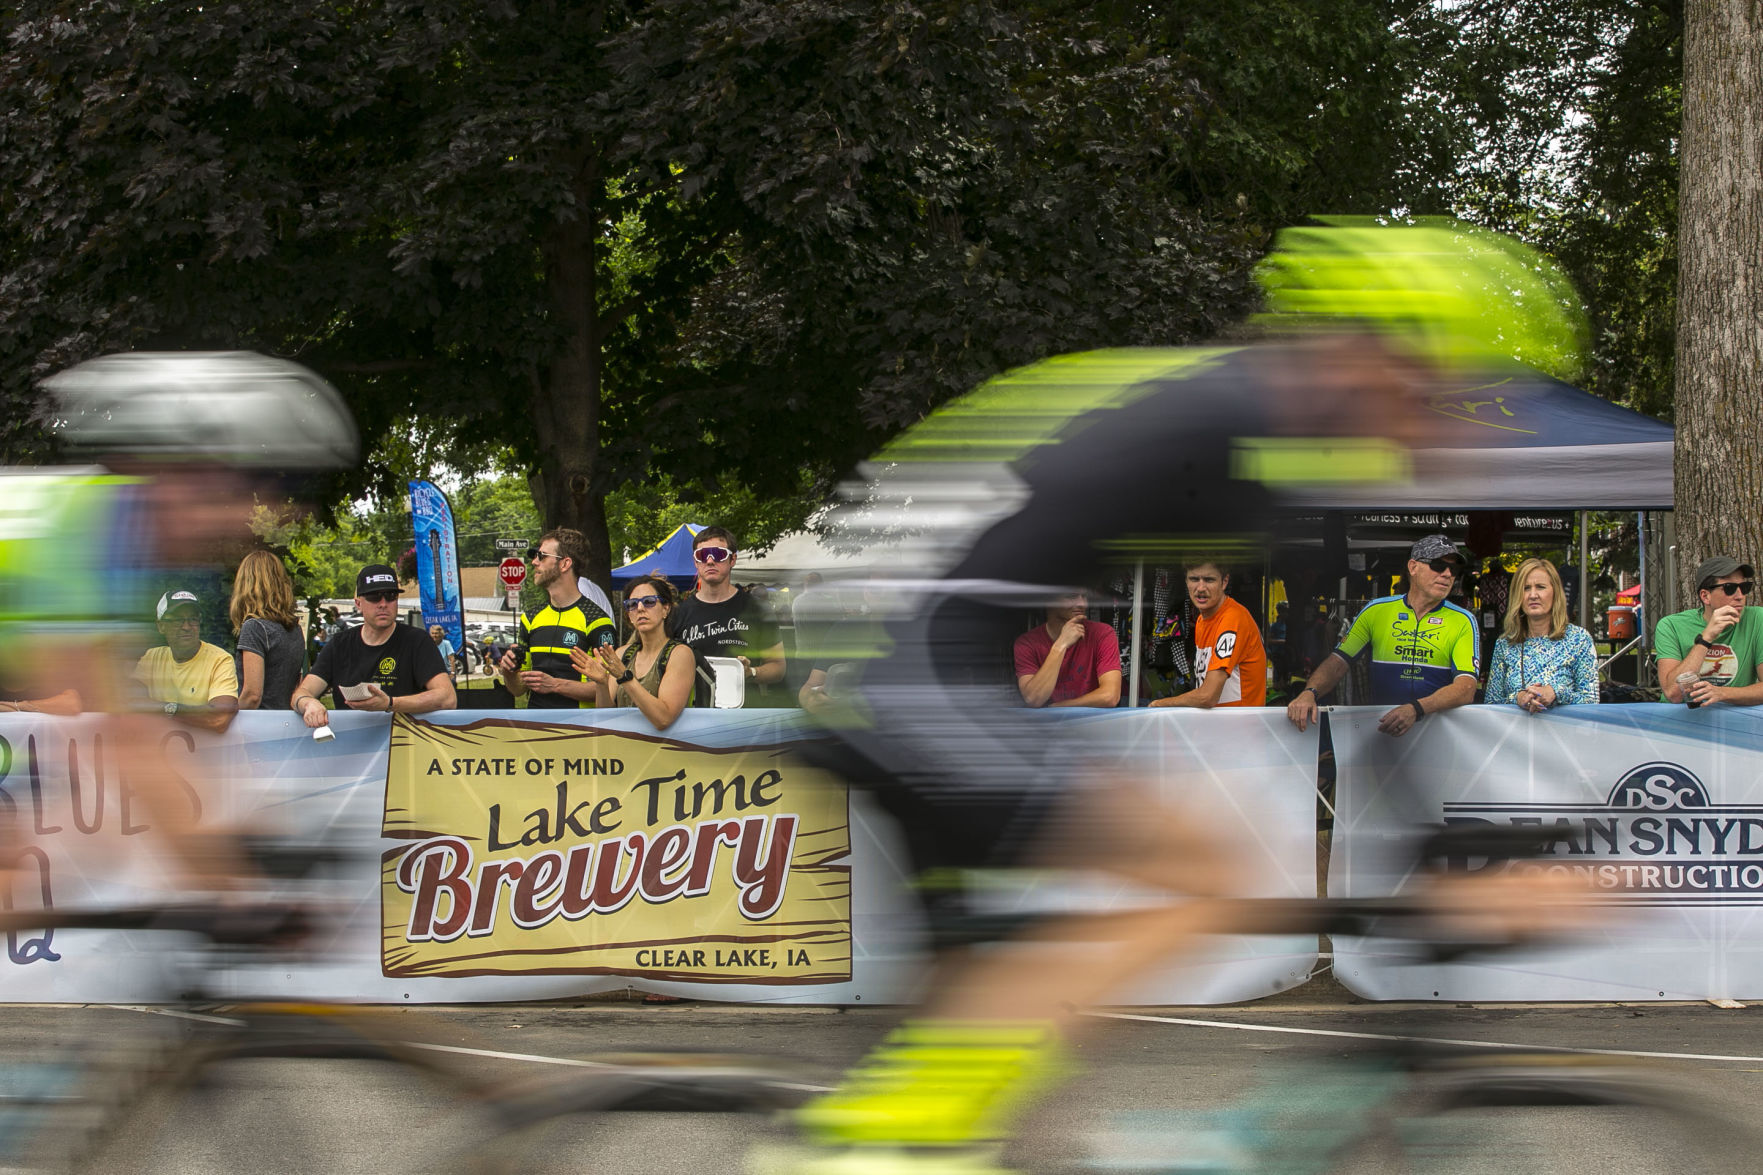 Clear Lake bicycle festival discontinued after 15 years pic